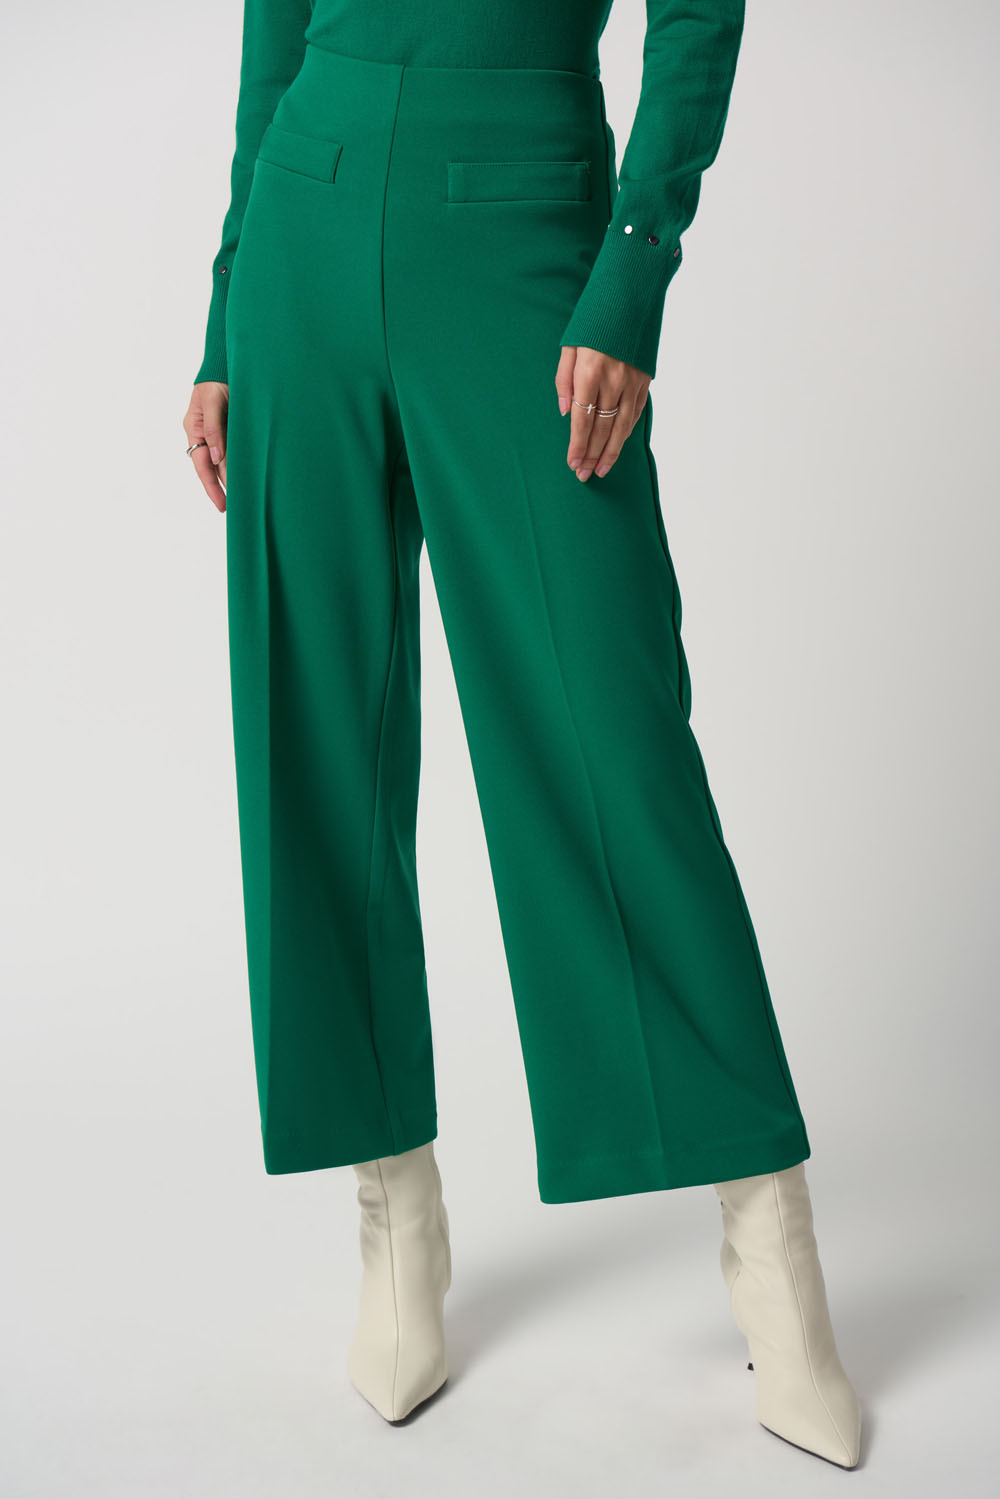 A New Day Women's High-rise Wide Leg Pants - Green Size 18 NWT